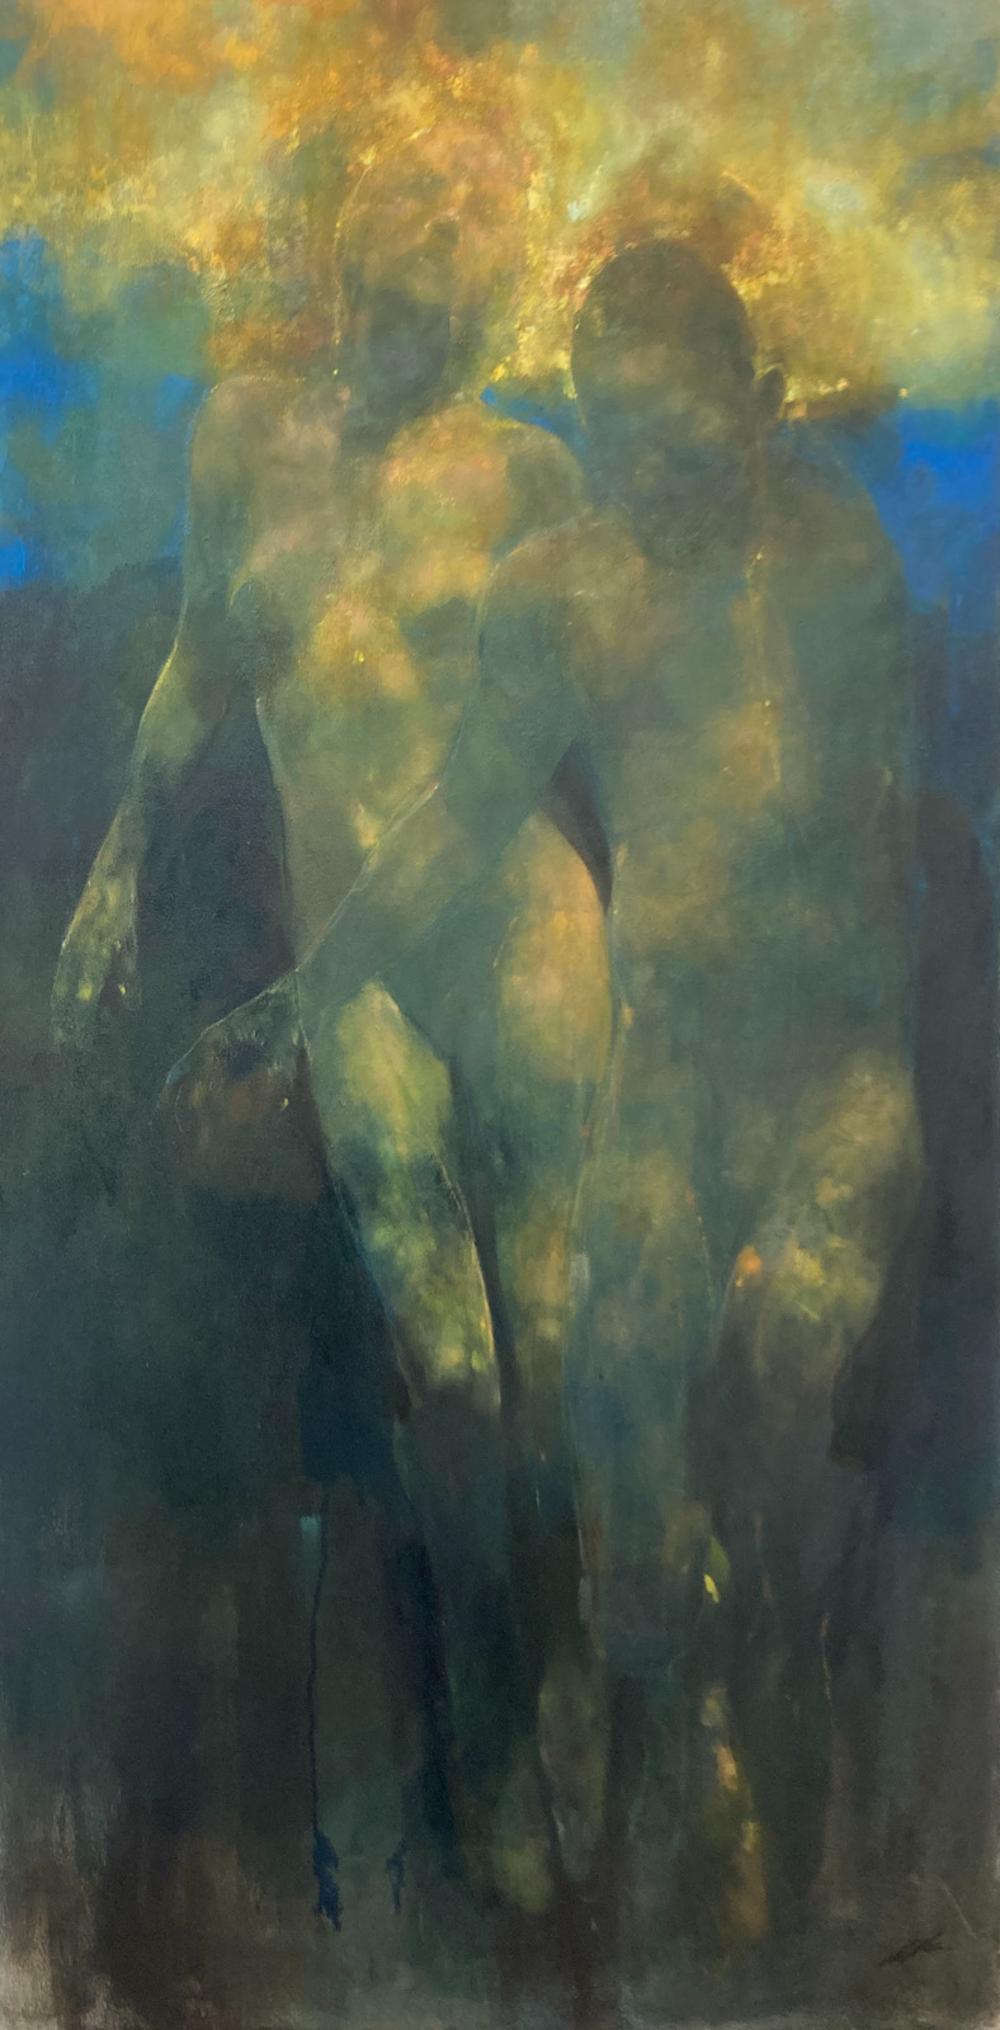 Elements & Senses - Atmospheric, Other-worldly Nudes: Oil Paint on Canvas